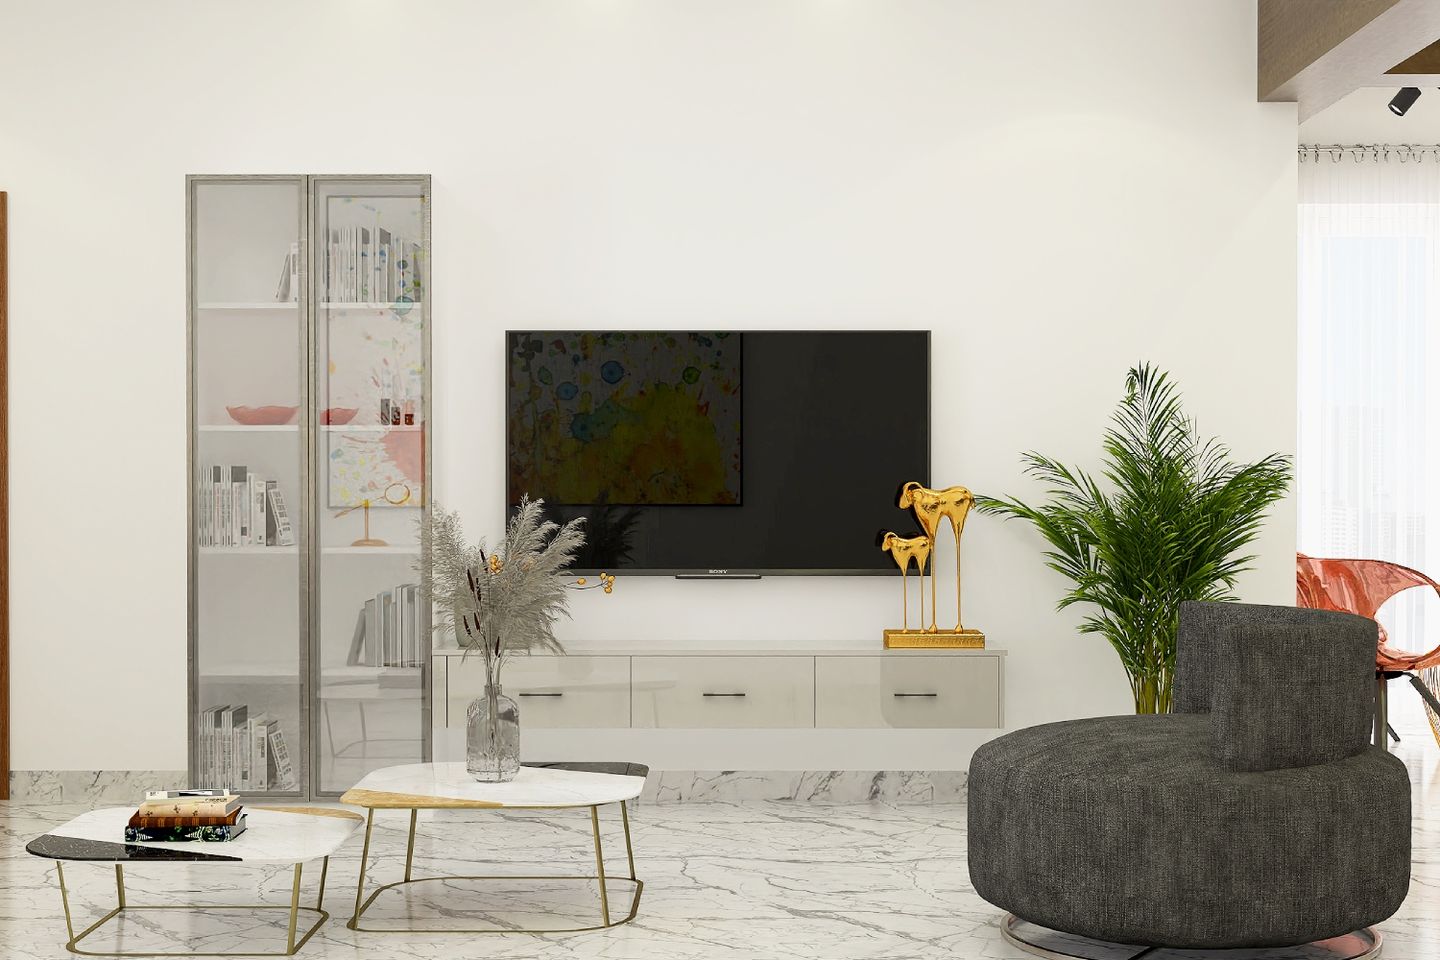 12x11 Ft TV Unit DesigN With Floating Console And Storage Cabinet - Livspace